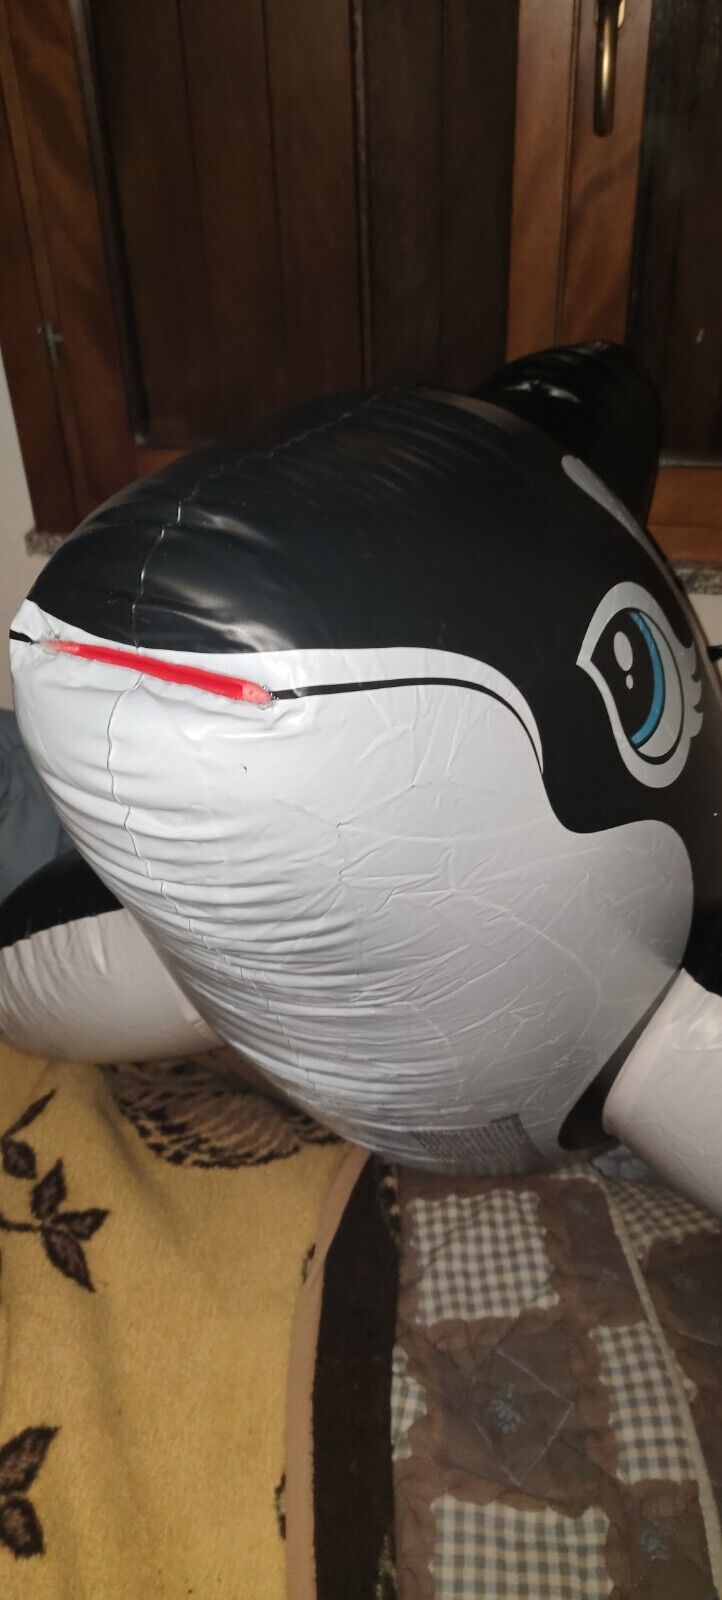 Inflatable Intex Orca Whale  top looner pop with 4 SPH inflatable triangular